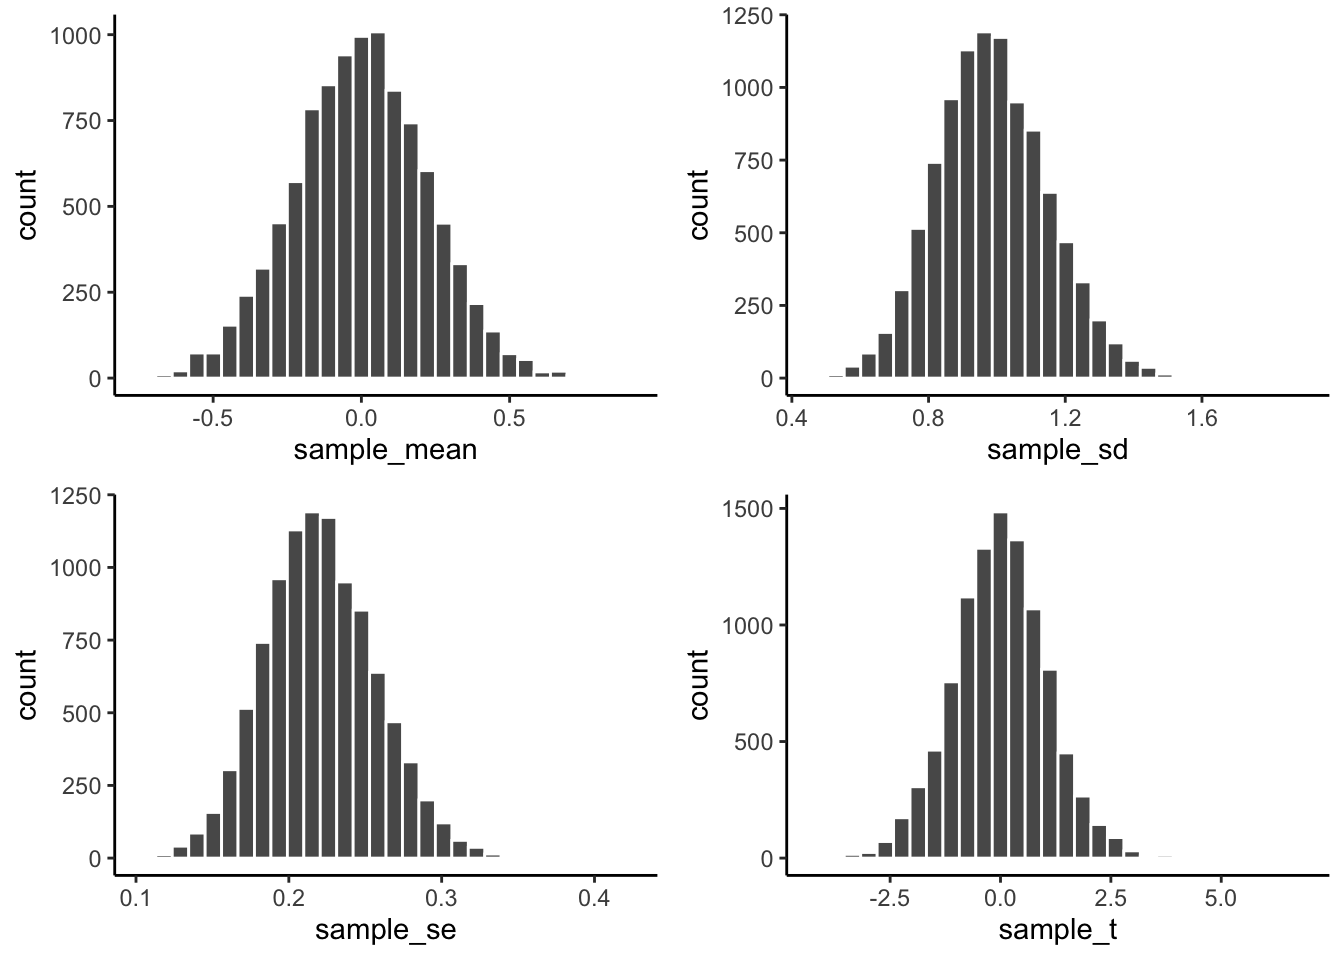 Sampling distributions for the mean, standard deviation, standard error of the mean, and t